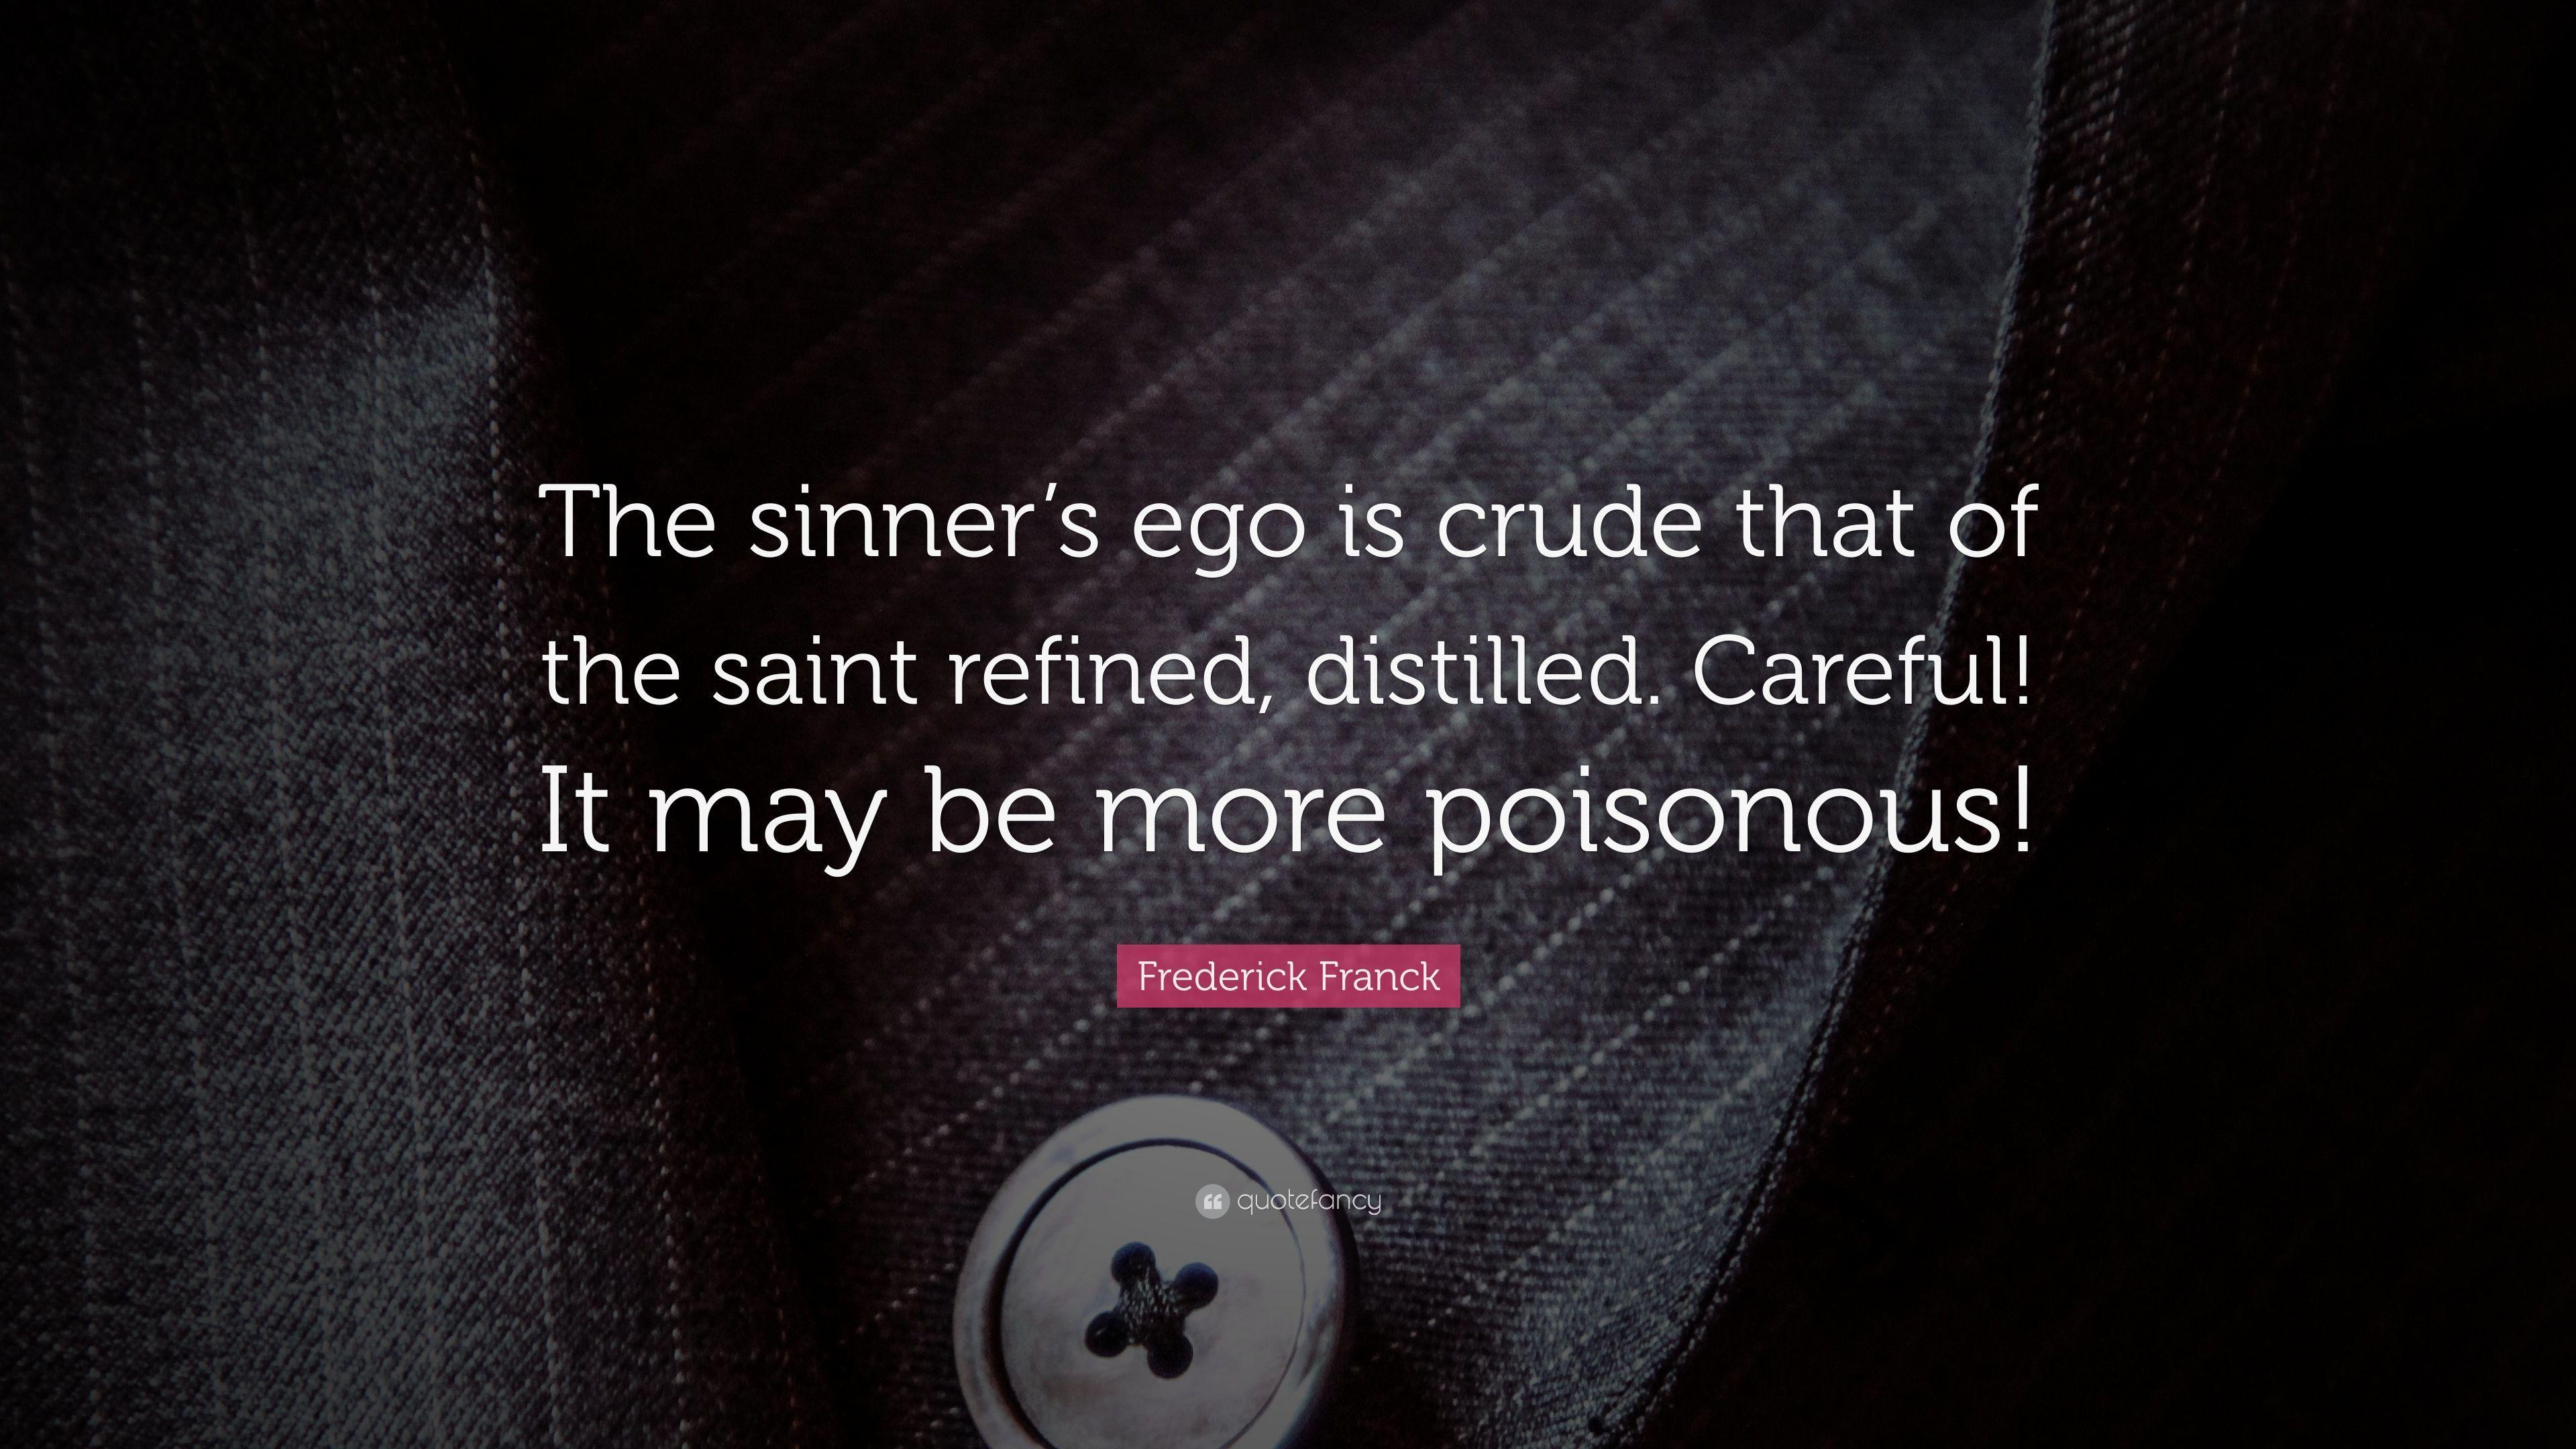 Frederick Franck Quote: “The sinner's ego is crude that